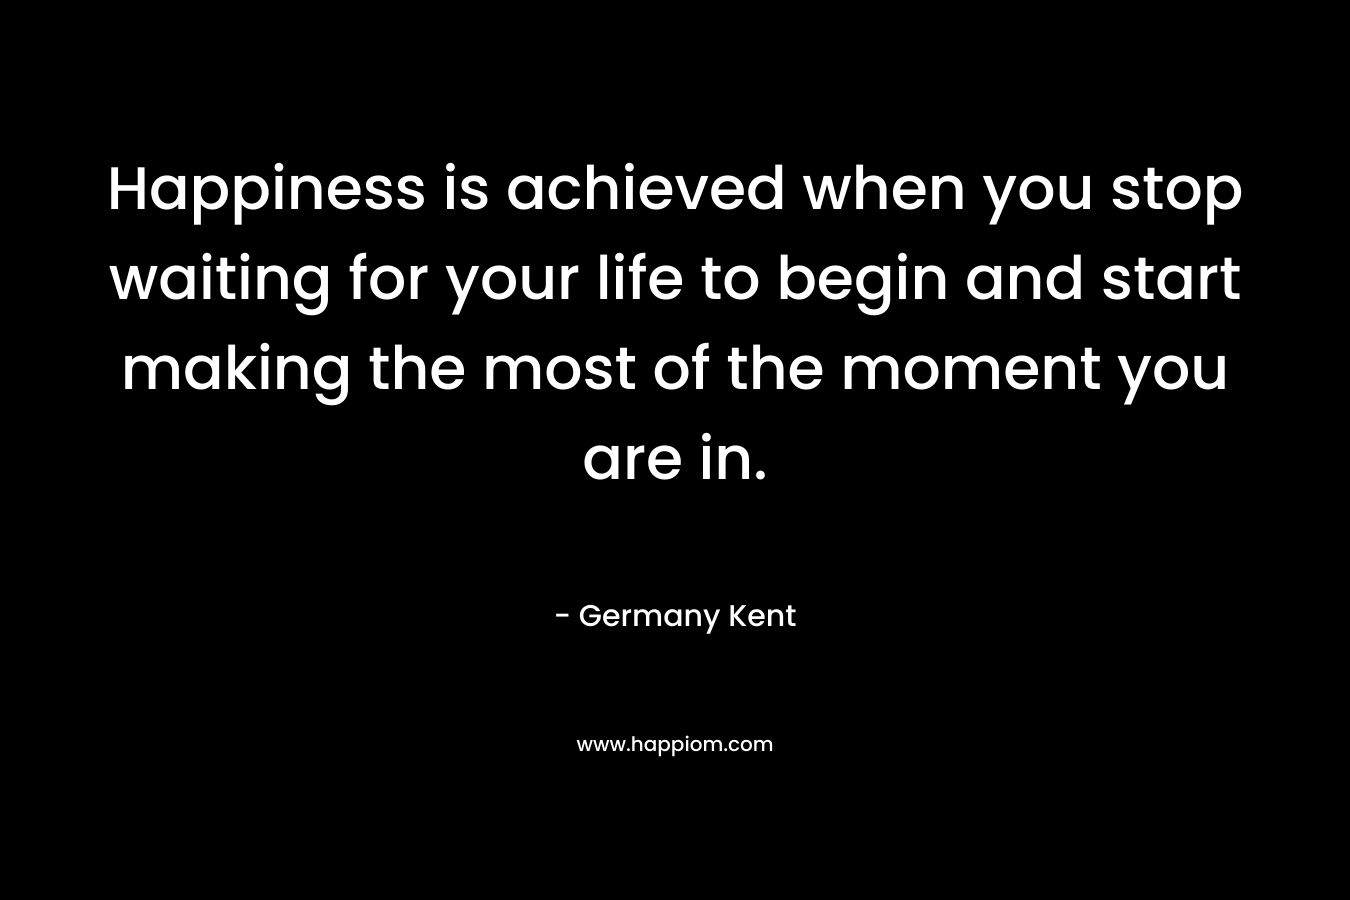 Happiness is achieved when you stop waiting for your life to begin and start making the most of the moment you are in.